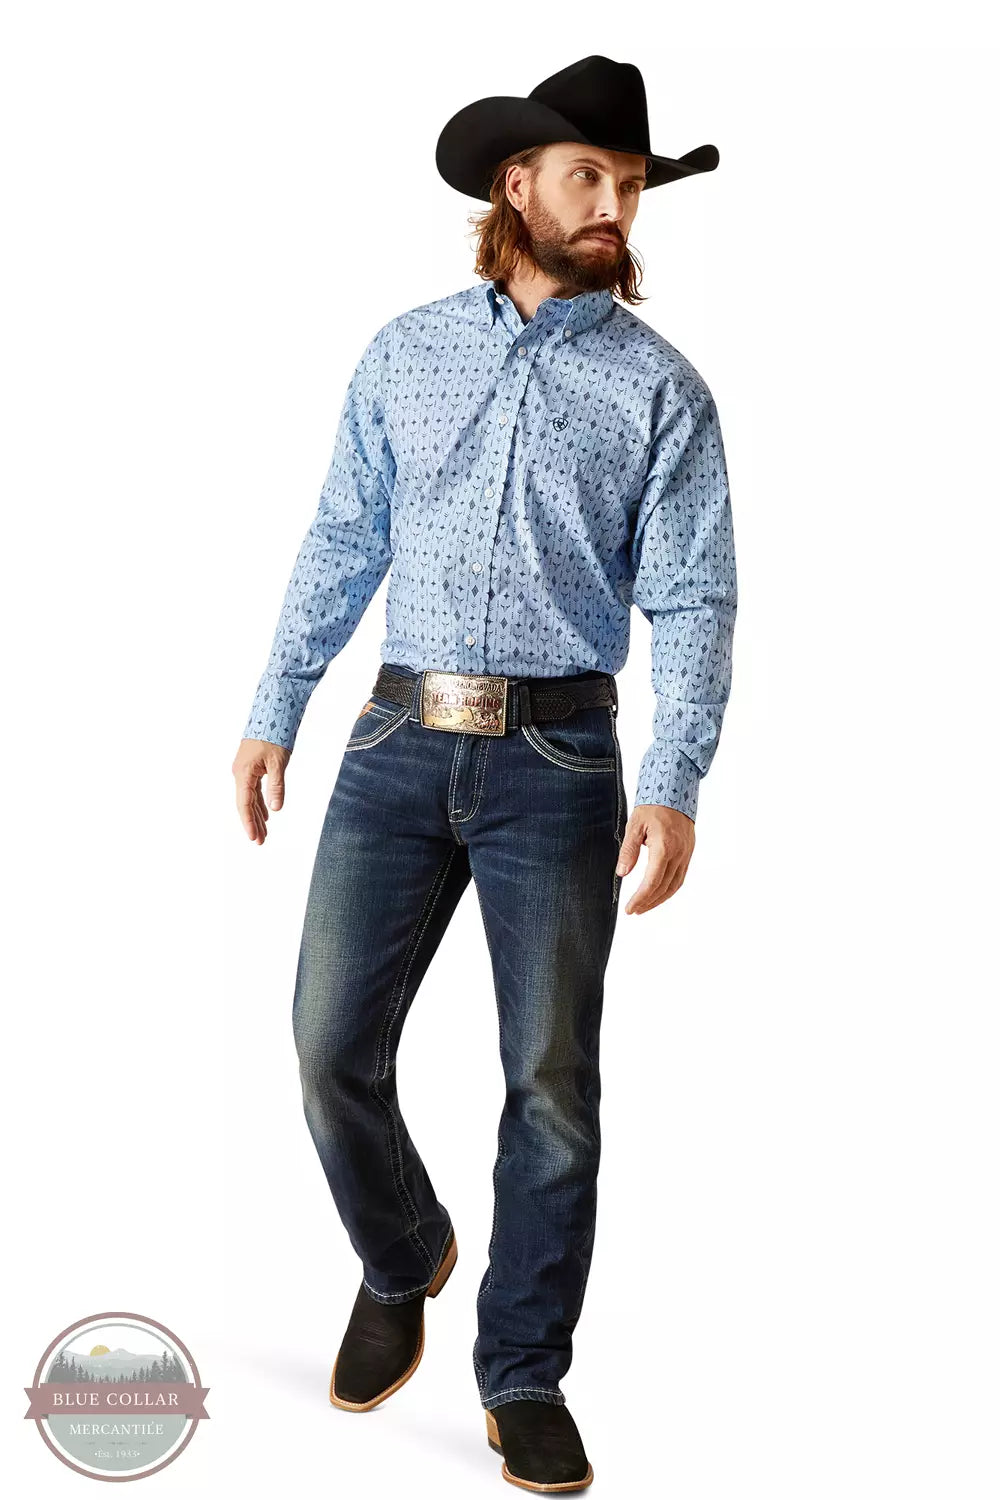 Ariat 10047204 Wrinkle Free Kyson Classic Long Sleeve Shirt in Light Blue Print Full View